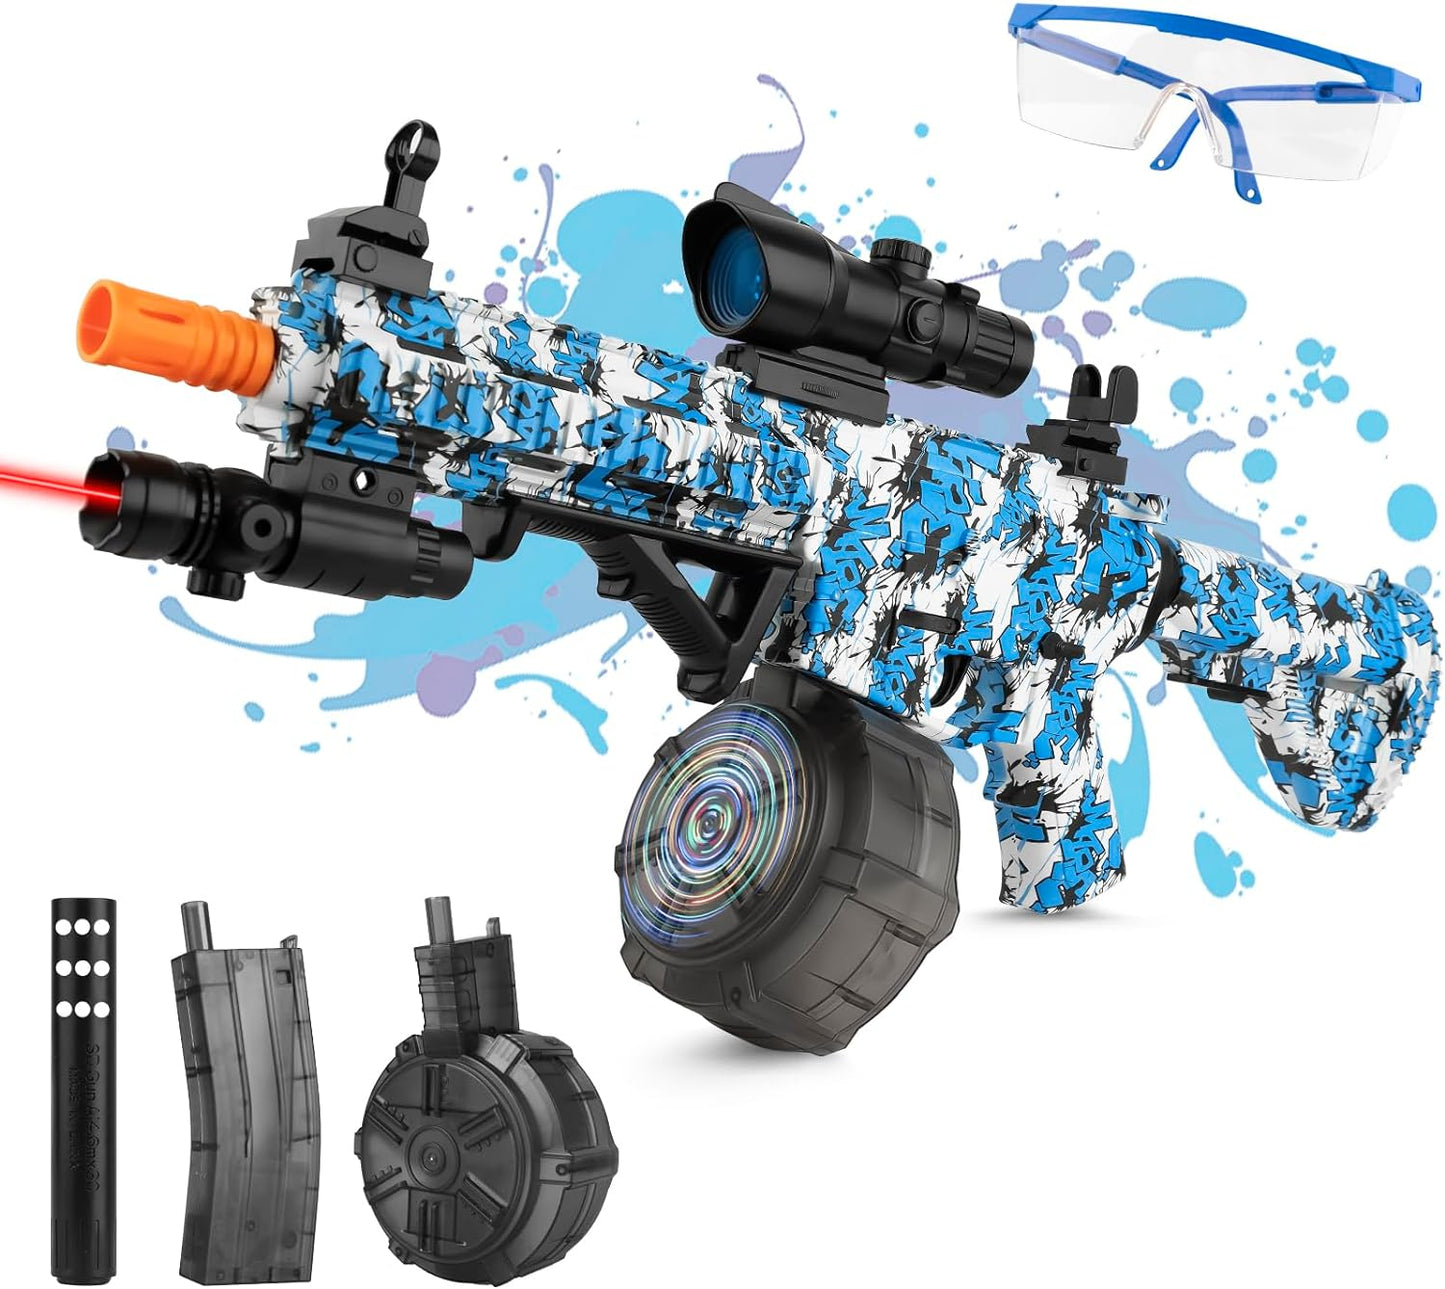 Large Gel Ball Blaster with Drum & Mag, Automatic and Manual Splatter Blaster, Electric Splat Blaster